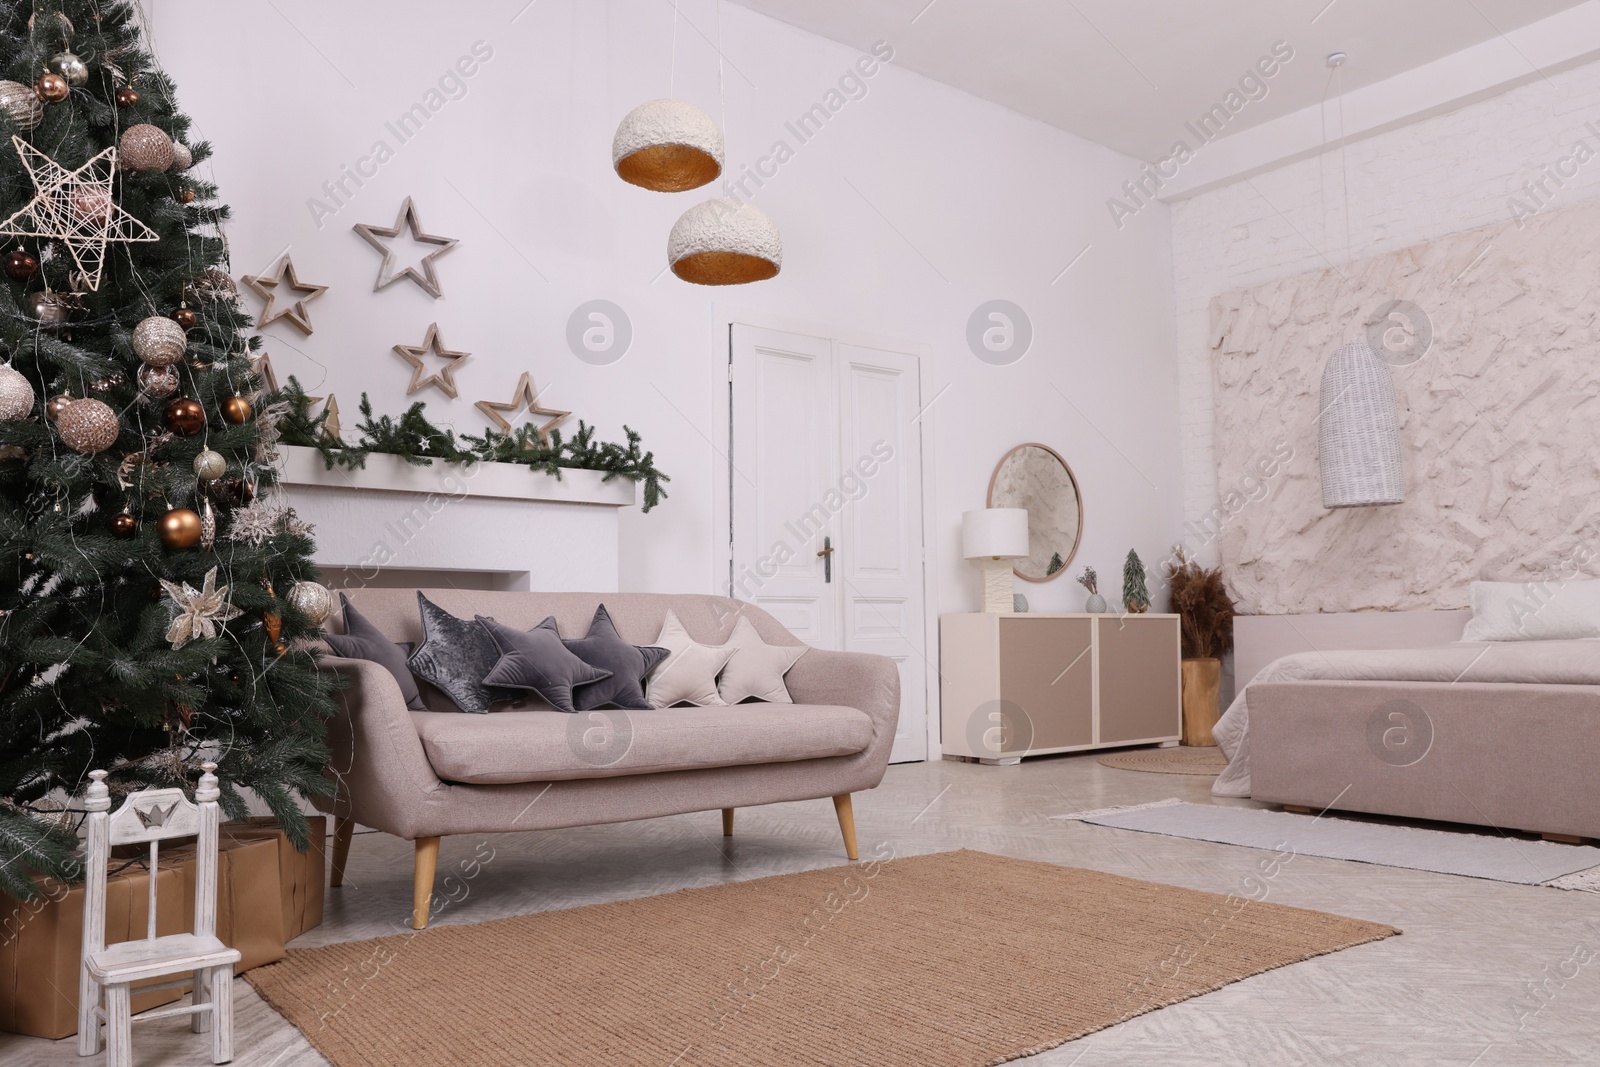 Photo of Living room interior with Christmas tree and festive decor